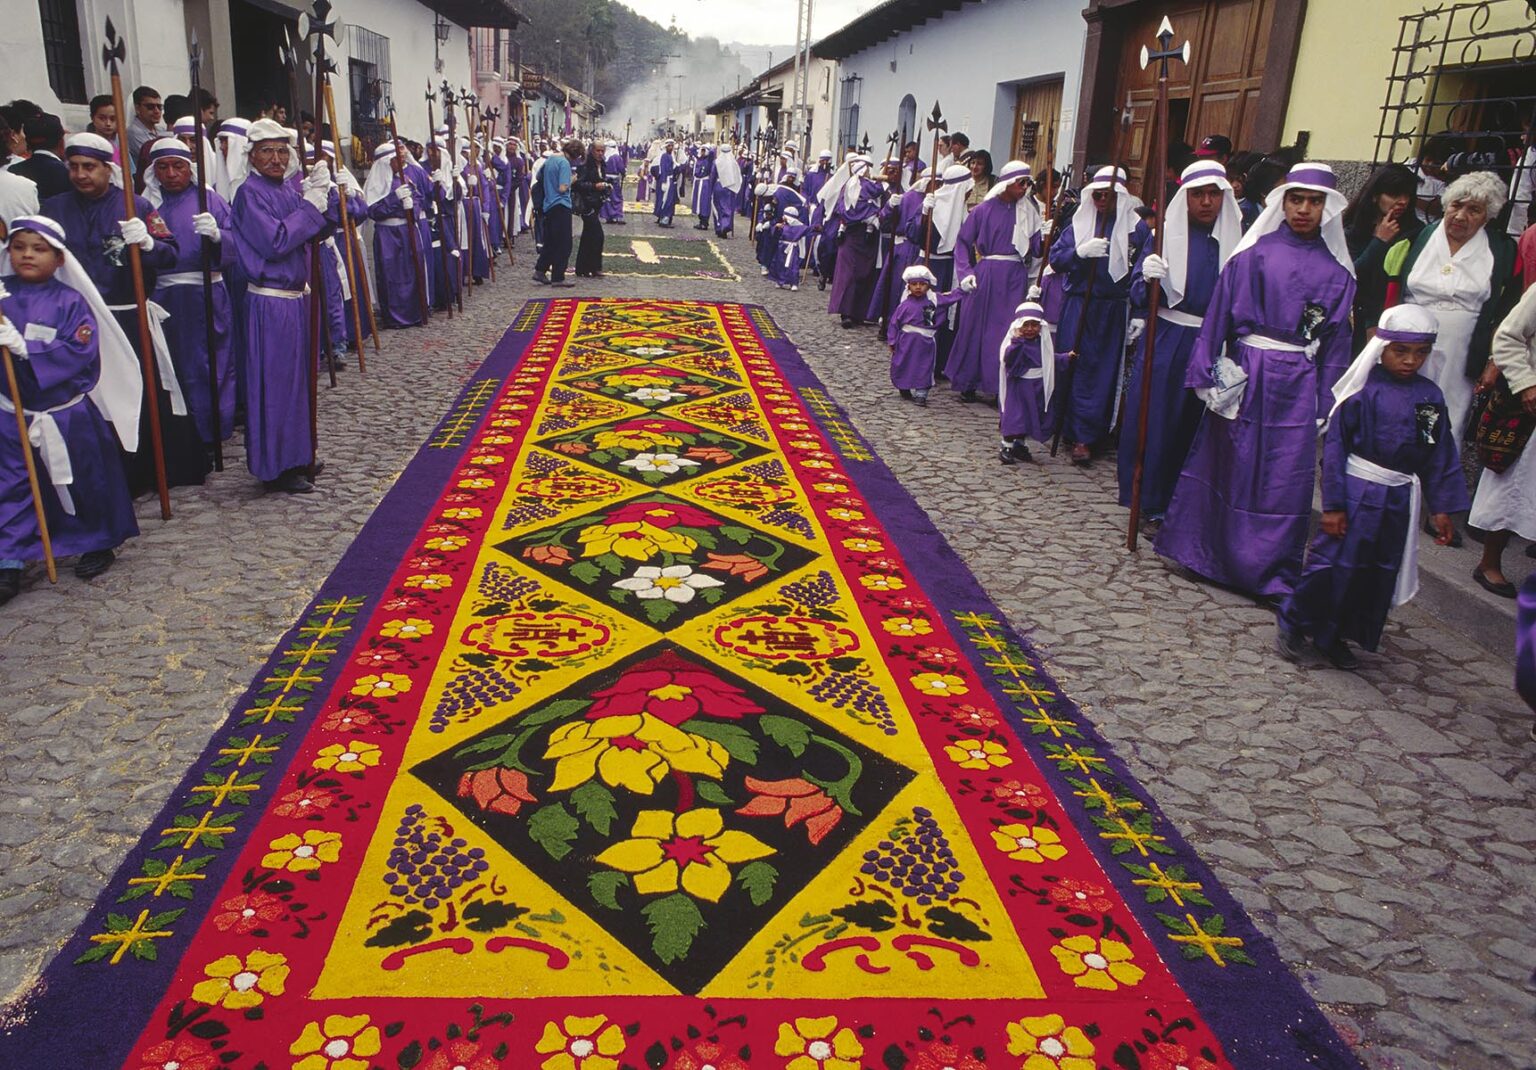 ALFOMBRA (carpet) made of sawdust and flowers for GOOD FRIDAY, a tradition dating to the 16th century - ANTIGUA, GUATEMALA